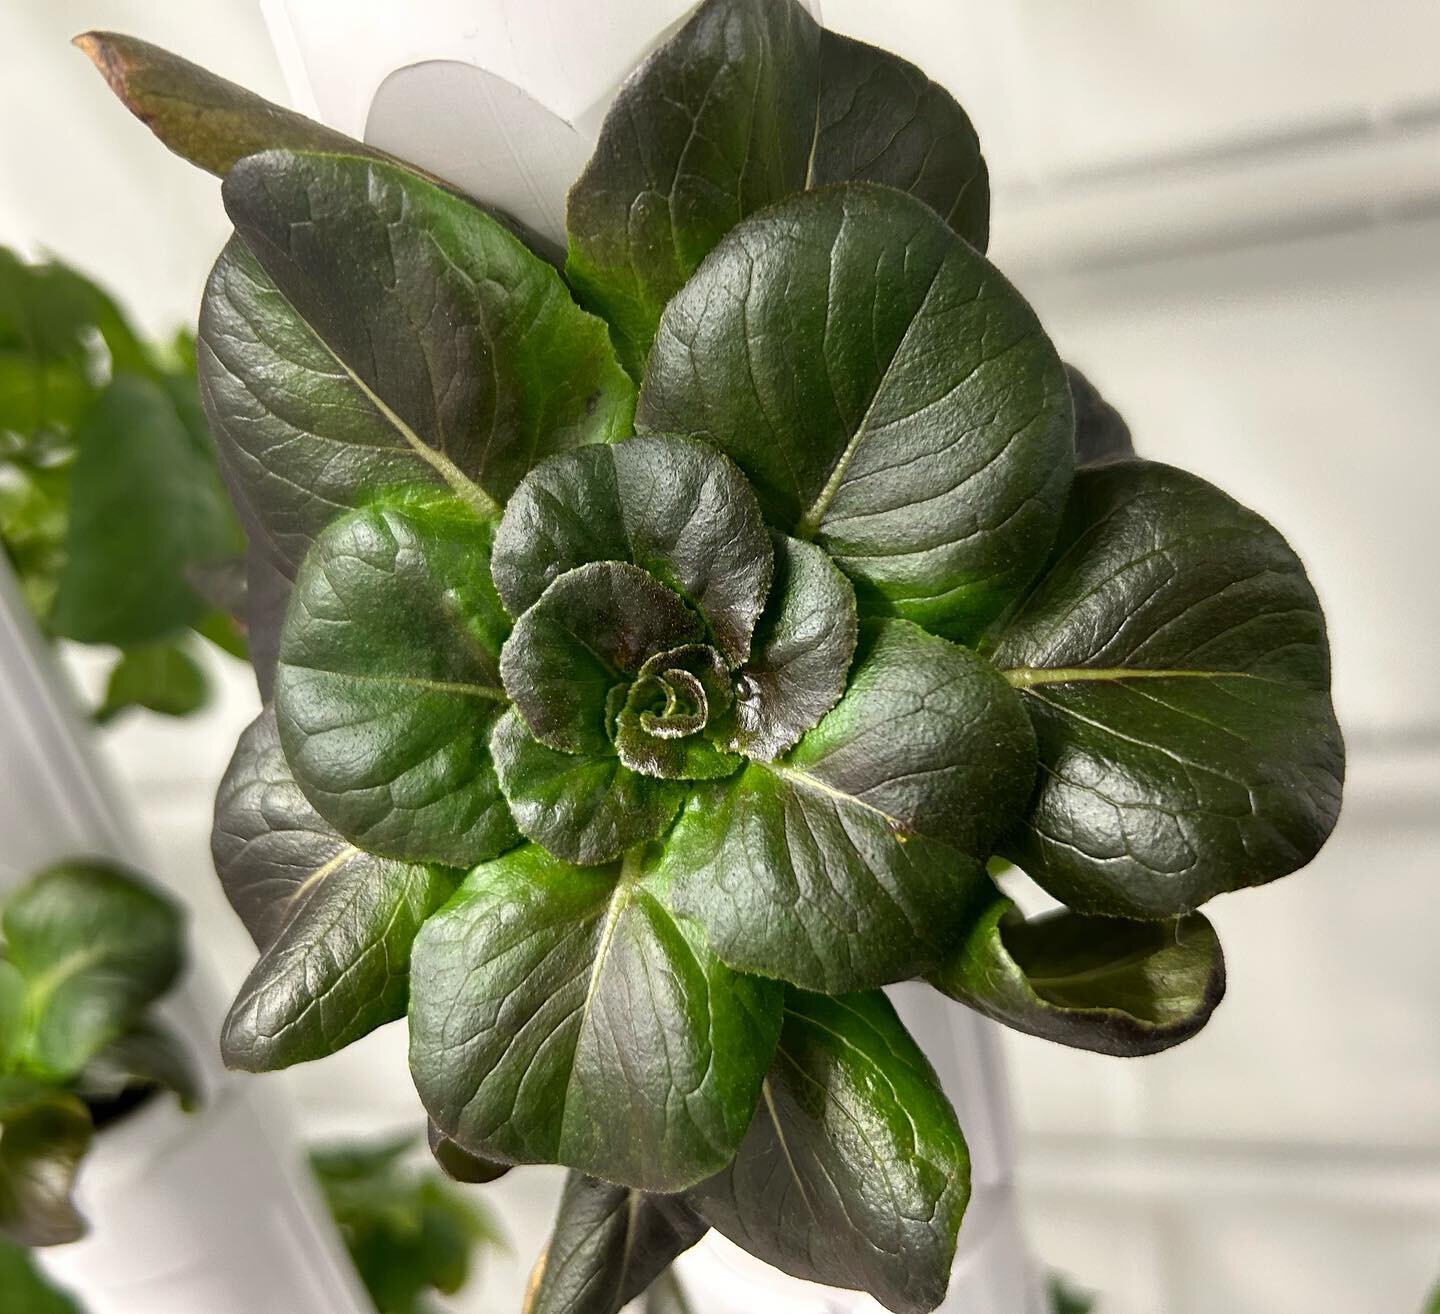 Hydroponic red butterhead coming soon!  Will be available for purchase at our ribbon cutting on April 16th!  Rsvp on our website to save your spot. #citygreens #urbanfarming #hydroponics #eatlocal #growlocal #knowyourfarmer #community